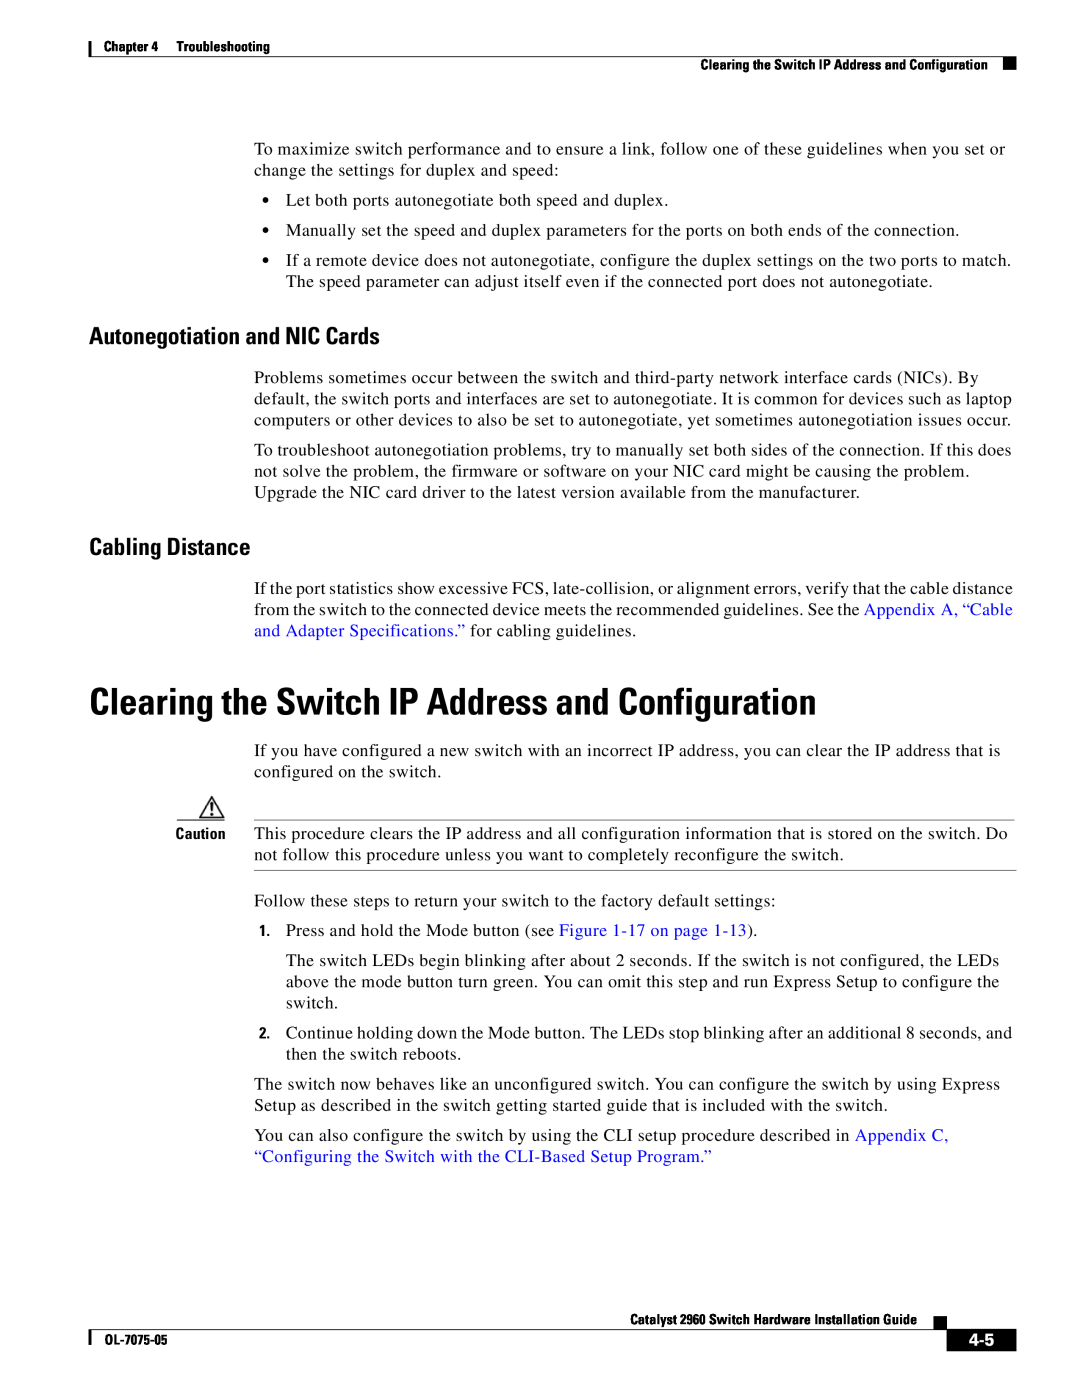 Cisco Systems 2960 Clearing the Switch IP Address and Configuration, Autonegotiation and NIC Cards, Cabling Distance 